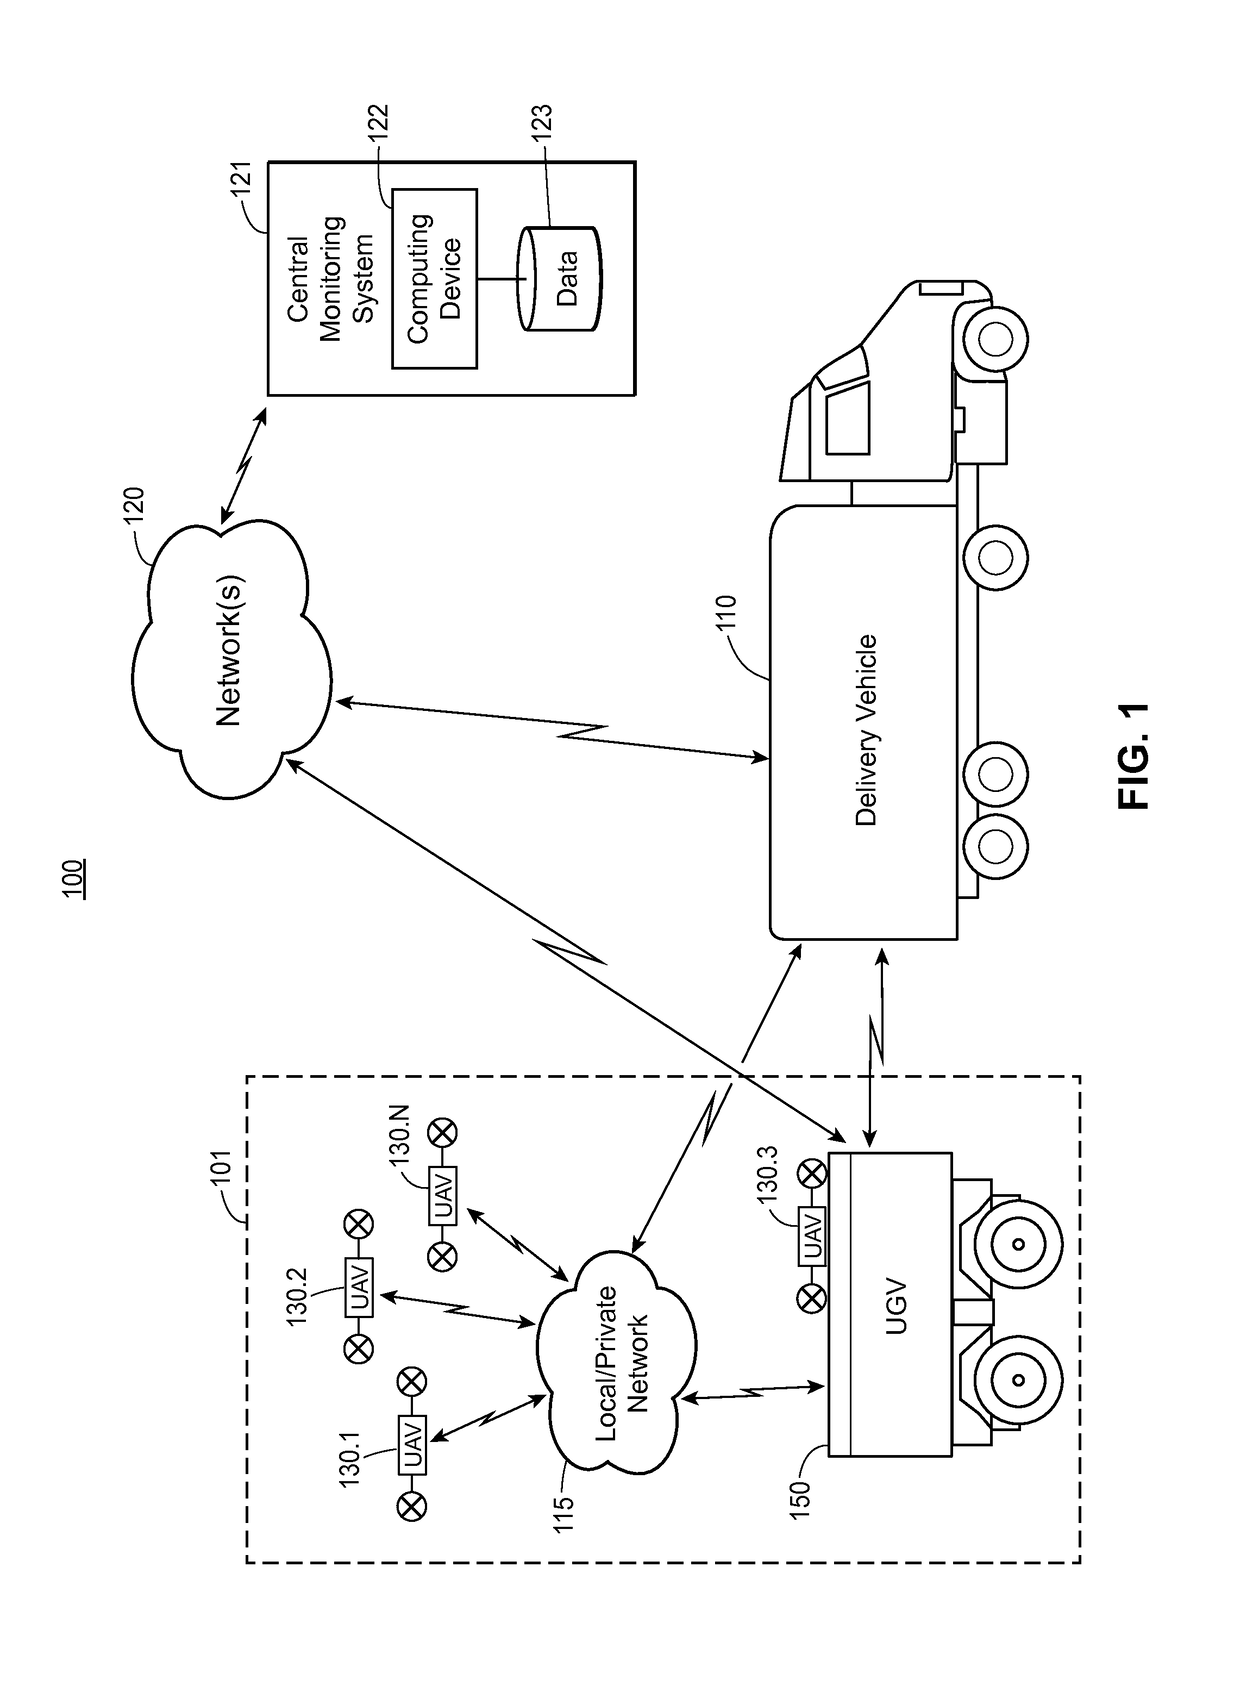 Systems and methods for remote data collection using unmanned vehicles